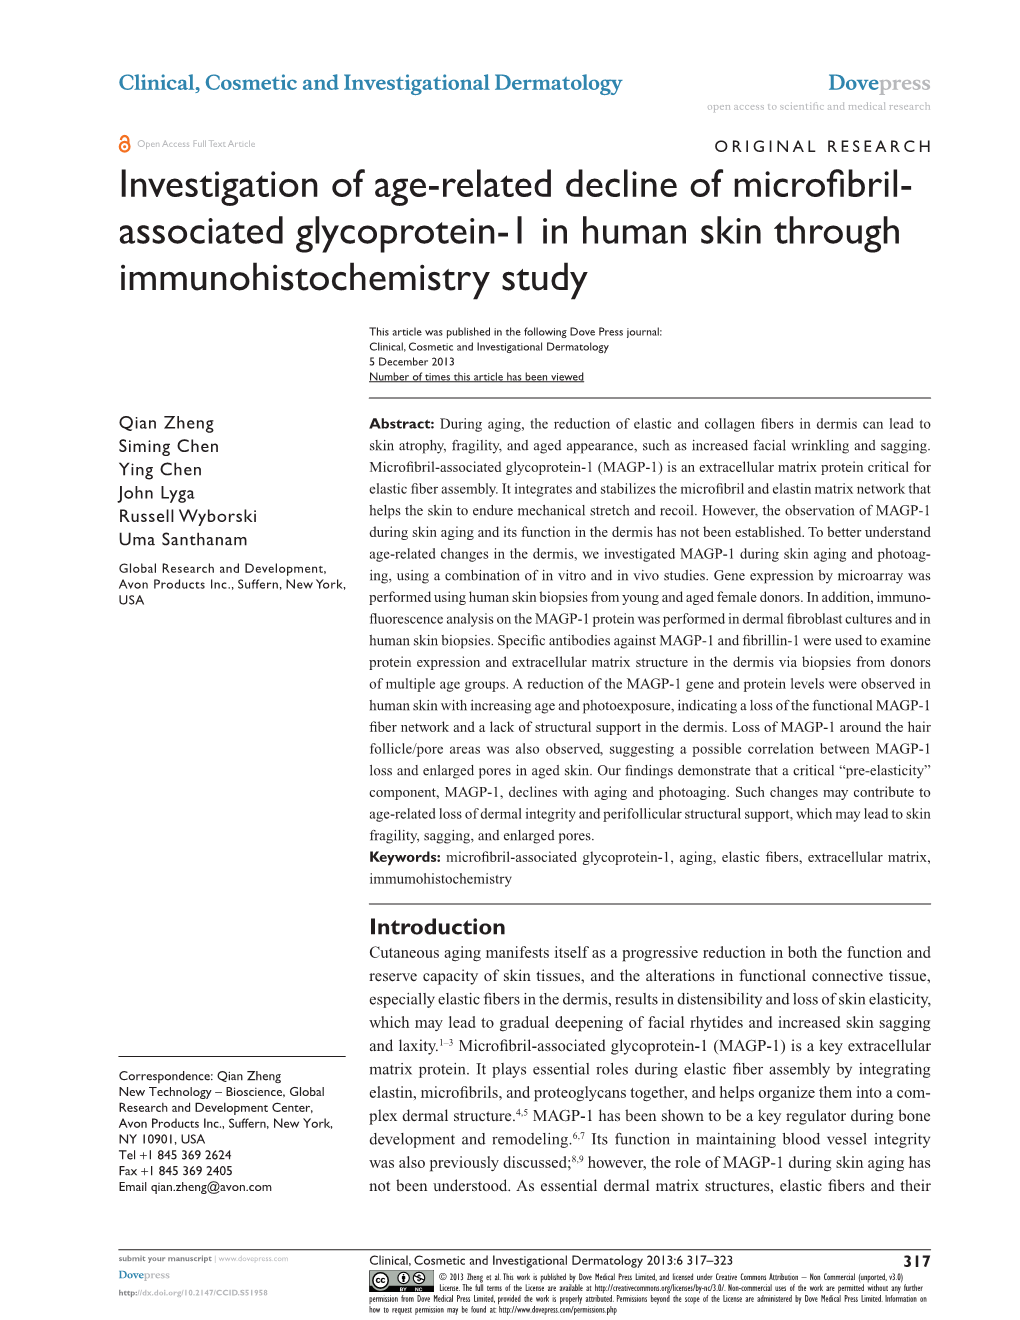 Investigation of Age-Related Decline of Microfibril-Associated Glycoprotein